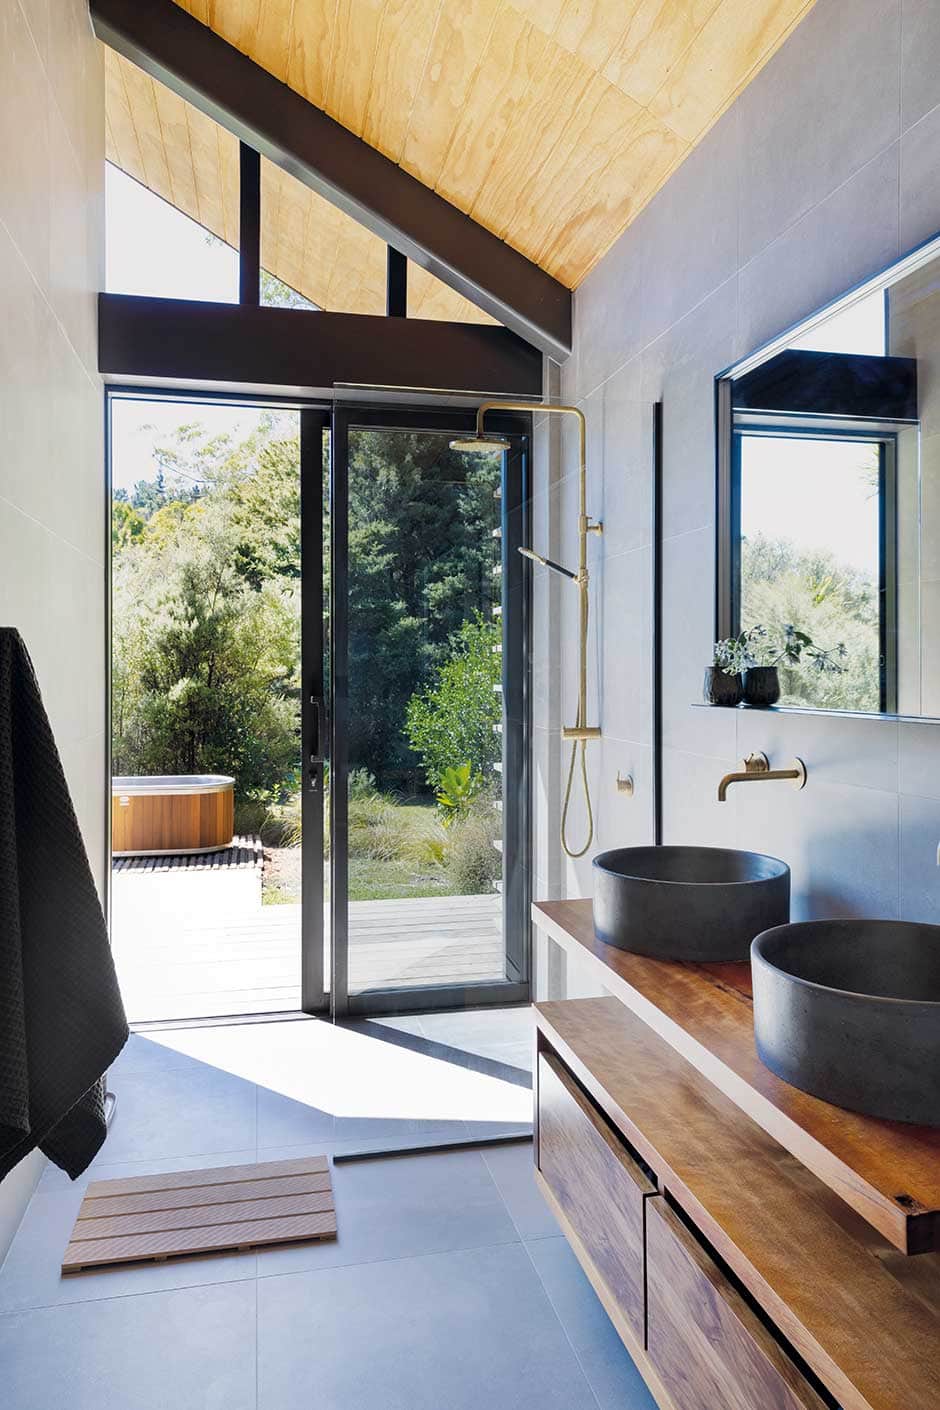 Golfer Paul Reid and wife Siobhan’s Mangawhai renovation suits them to a tee